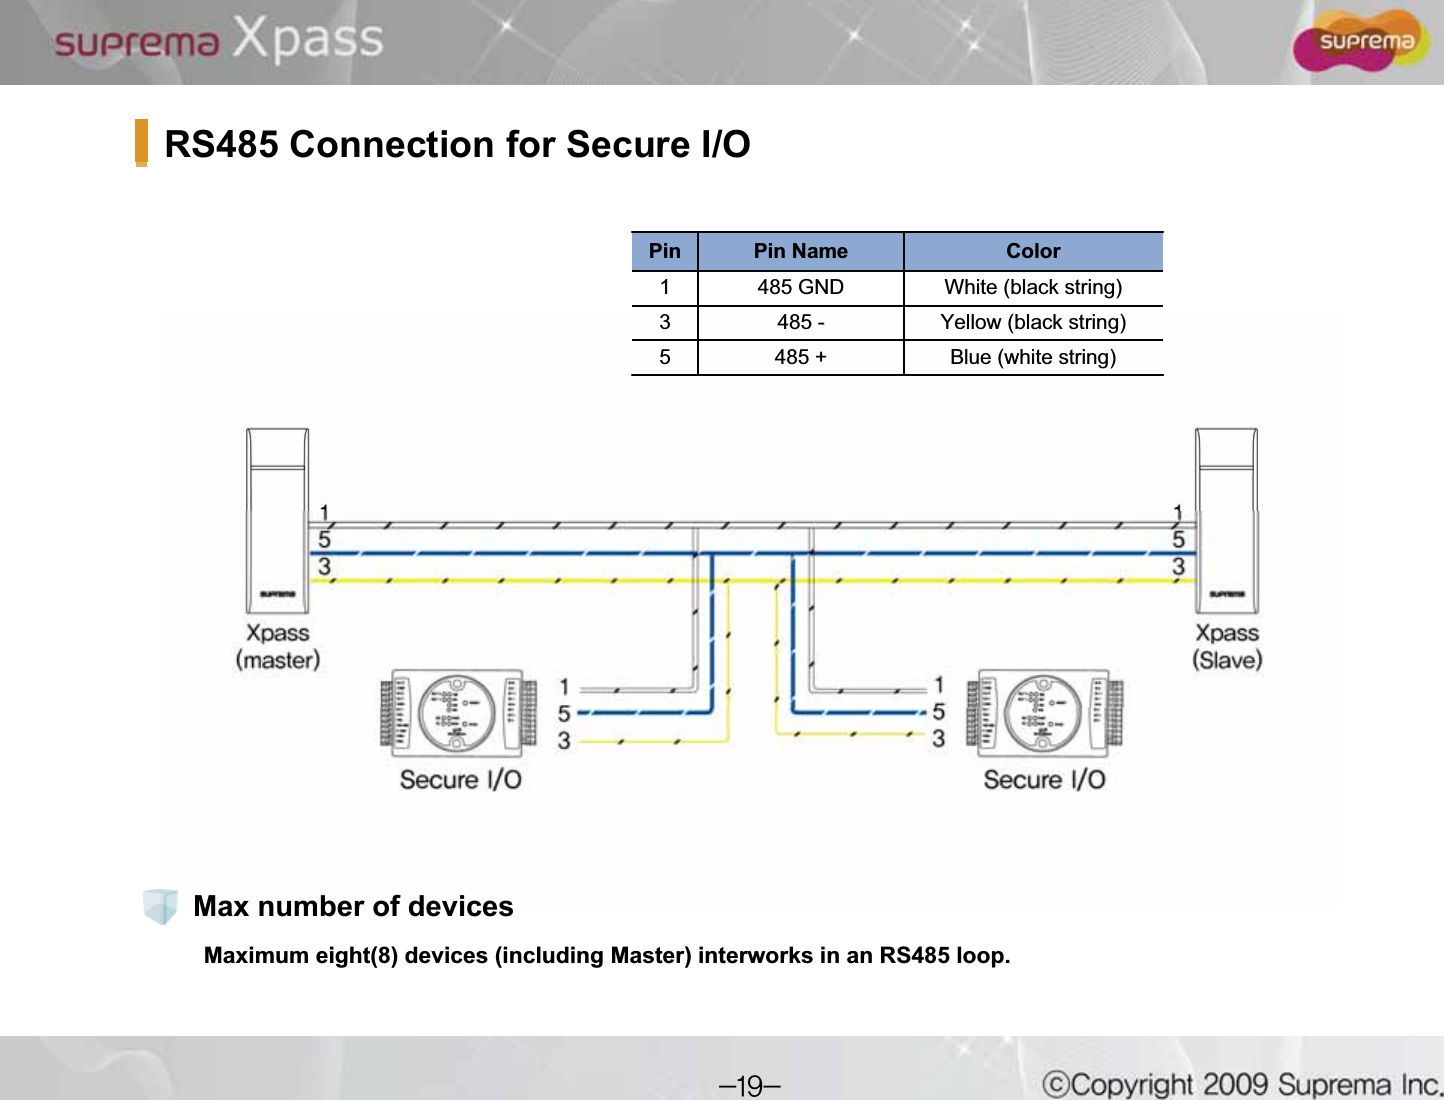 RS485 Connection for Secure I/OMax number of devicesPin Pin Name Color1 485 GND White (black string)3 485 - Yellow (black string)5 485 + Blue (white string)Maximum eight(8) devices (including Master) interworks in an RS485 loop.